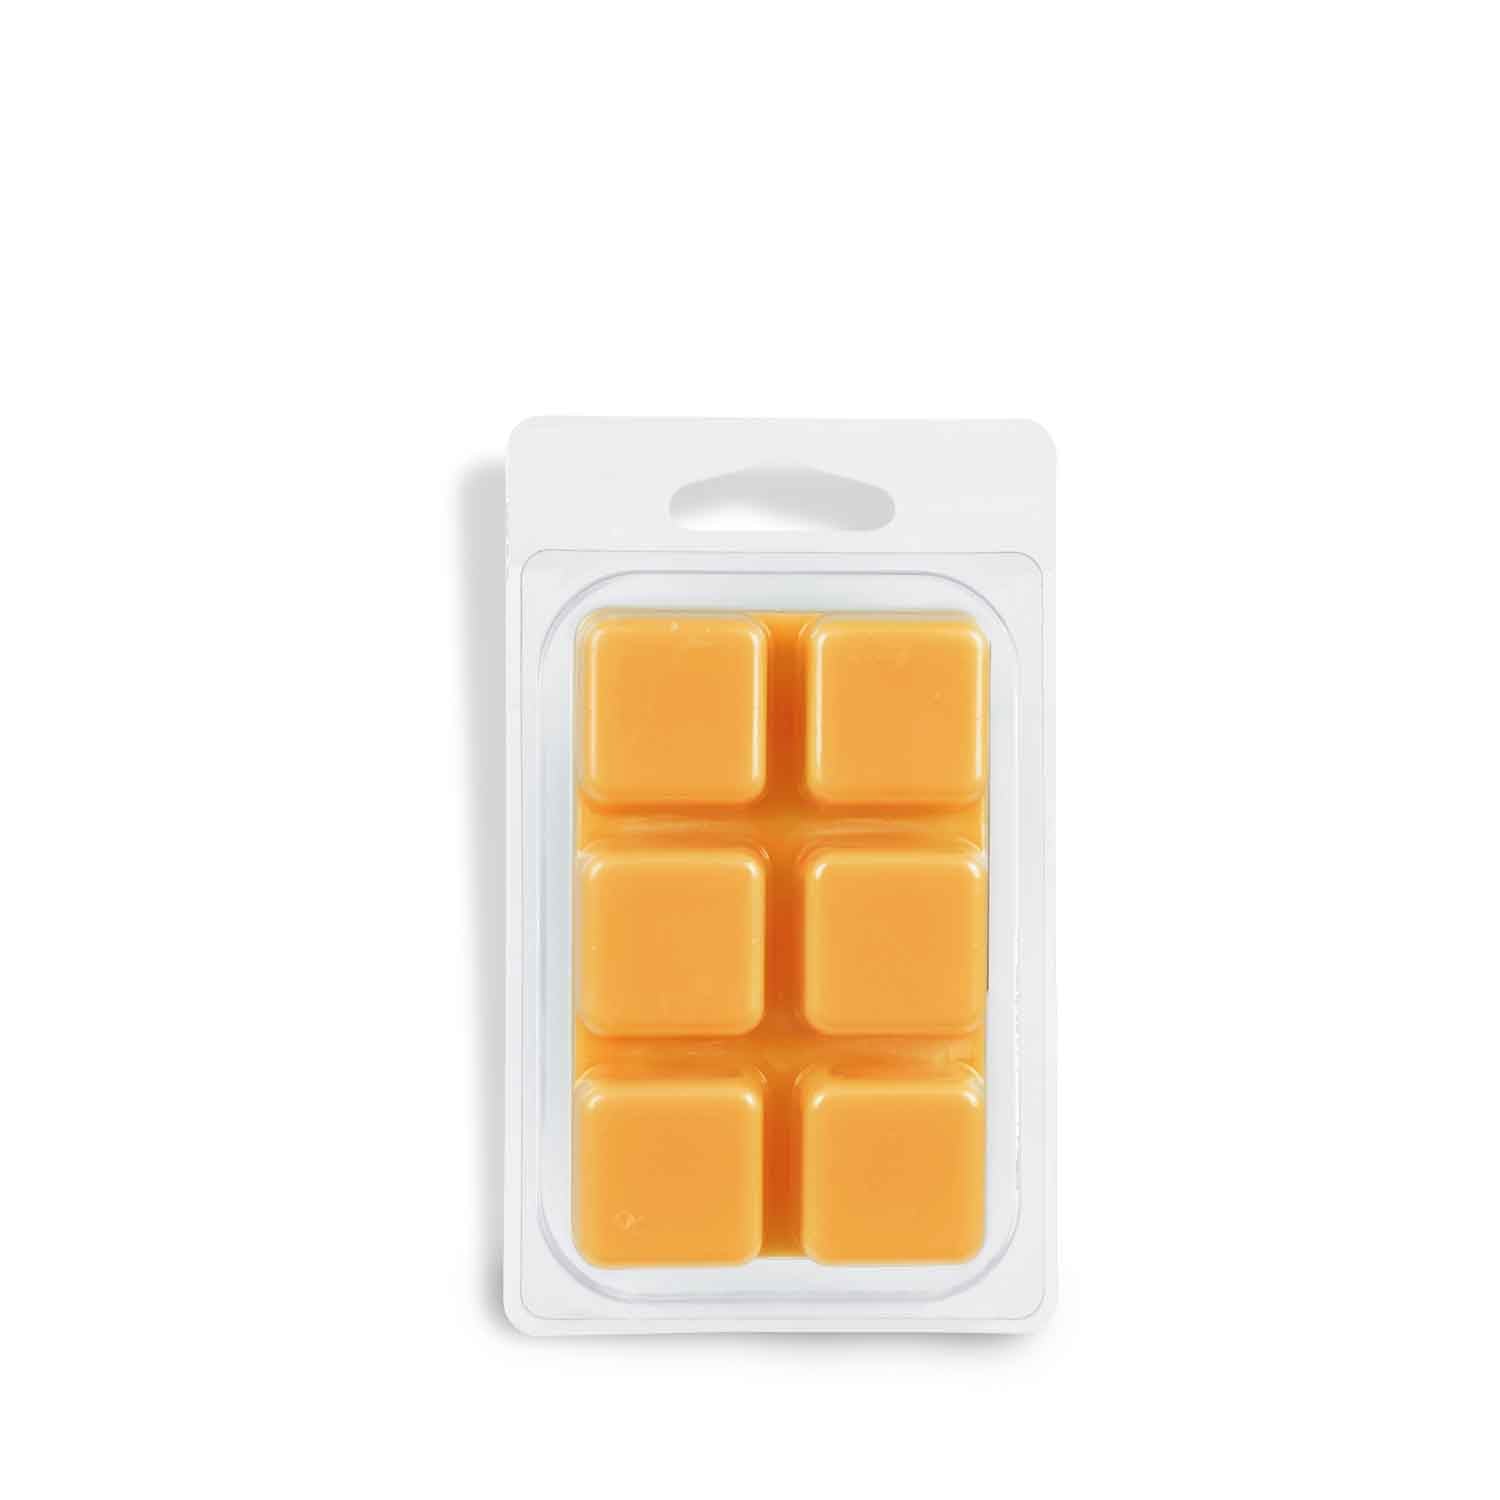 A pack of Citrus Clove Cider scented Tuscany Candle® wax melts (2.5 oz) on a white background.